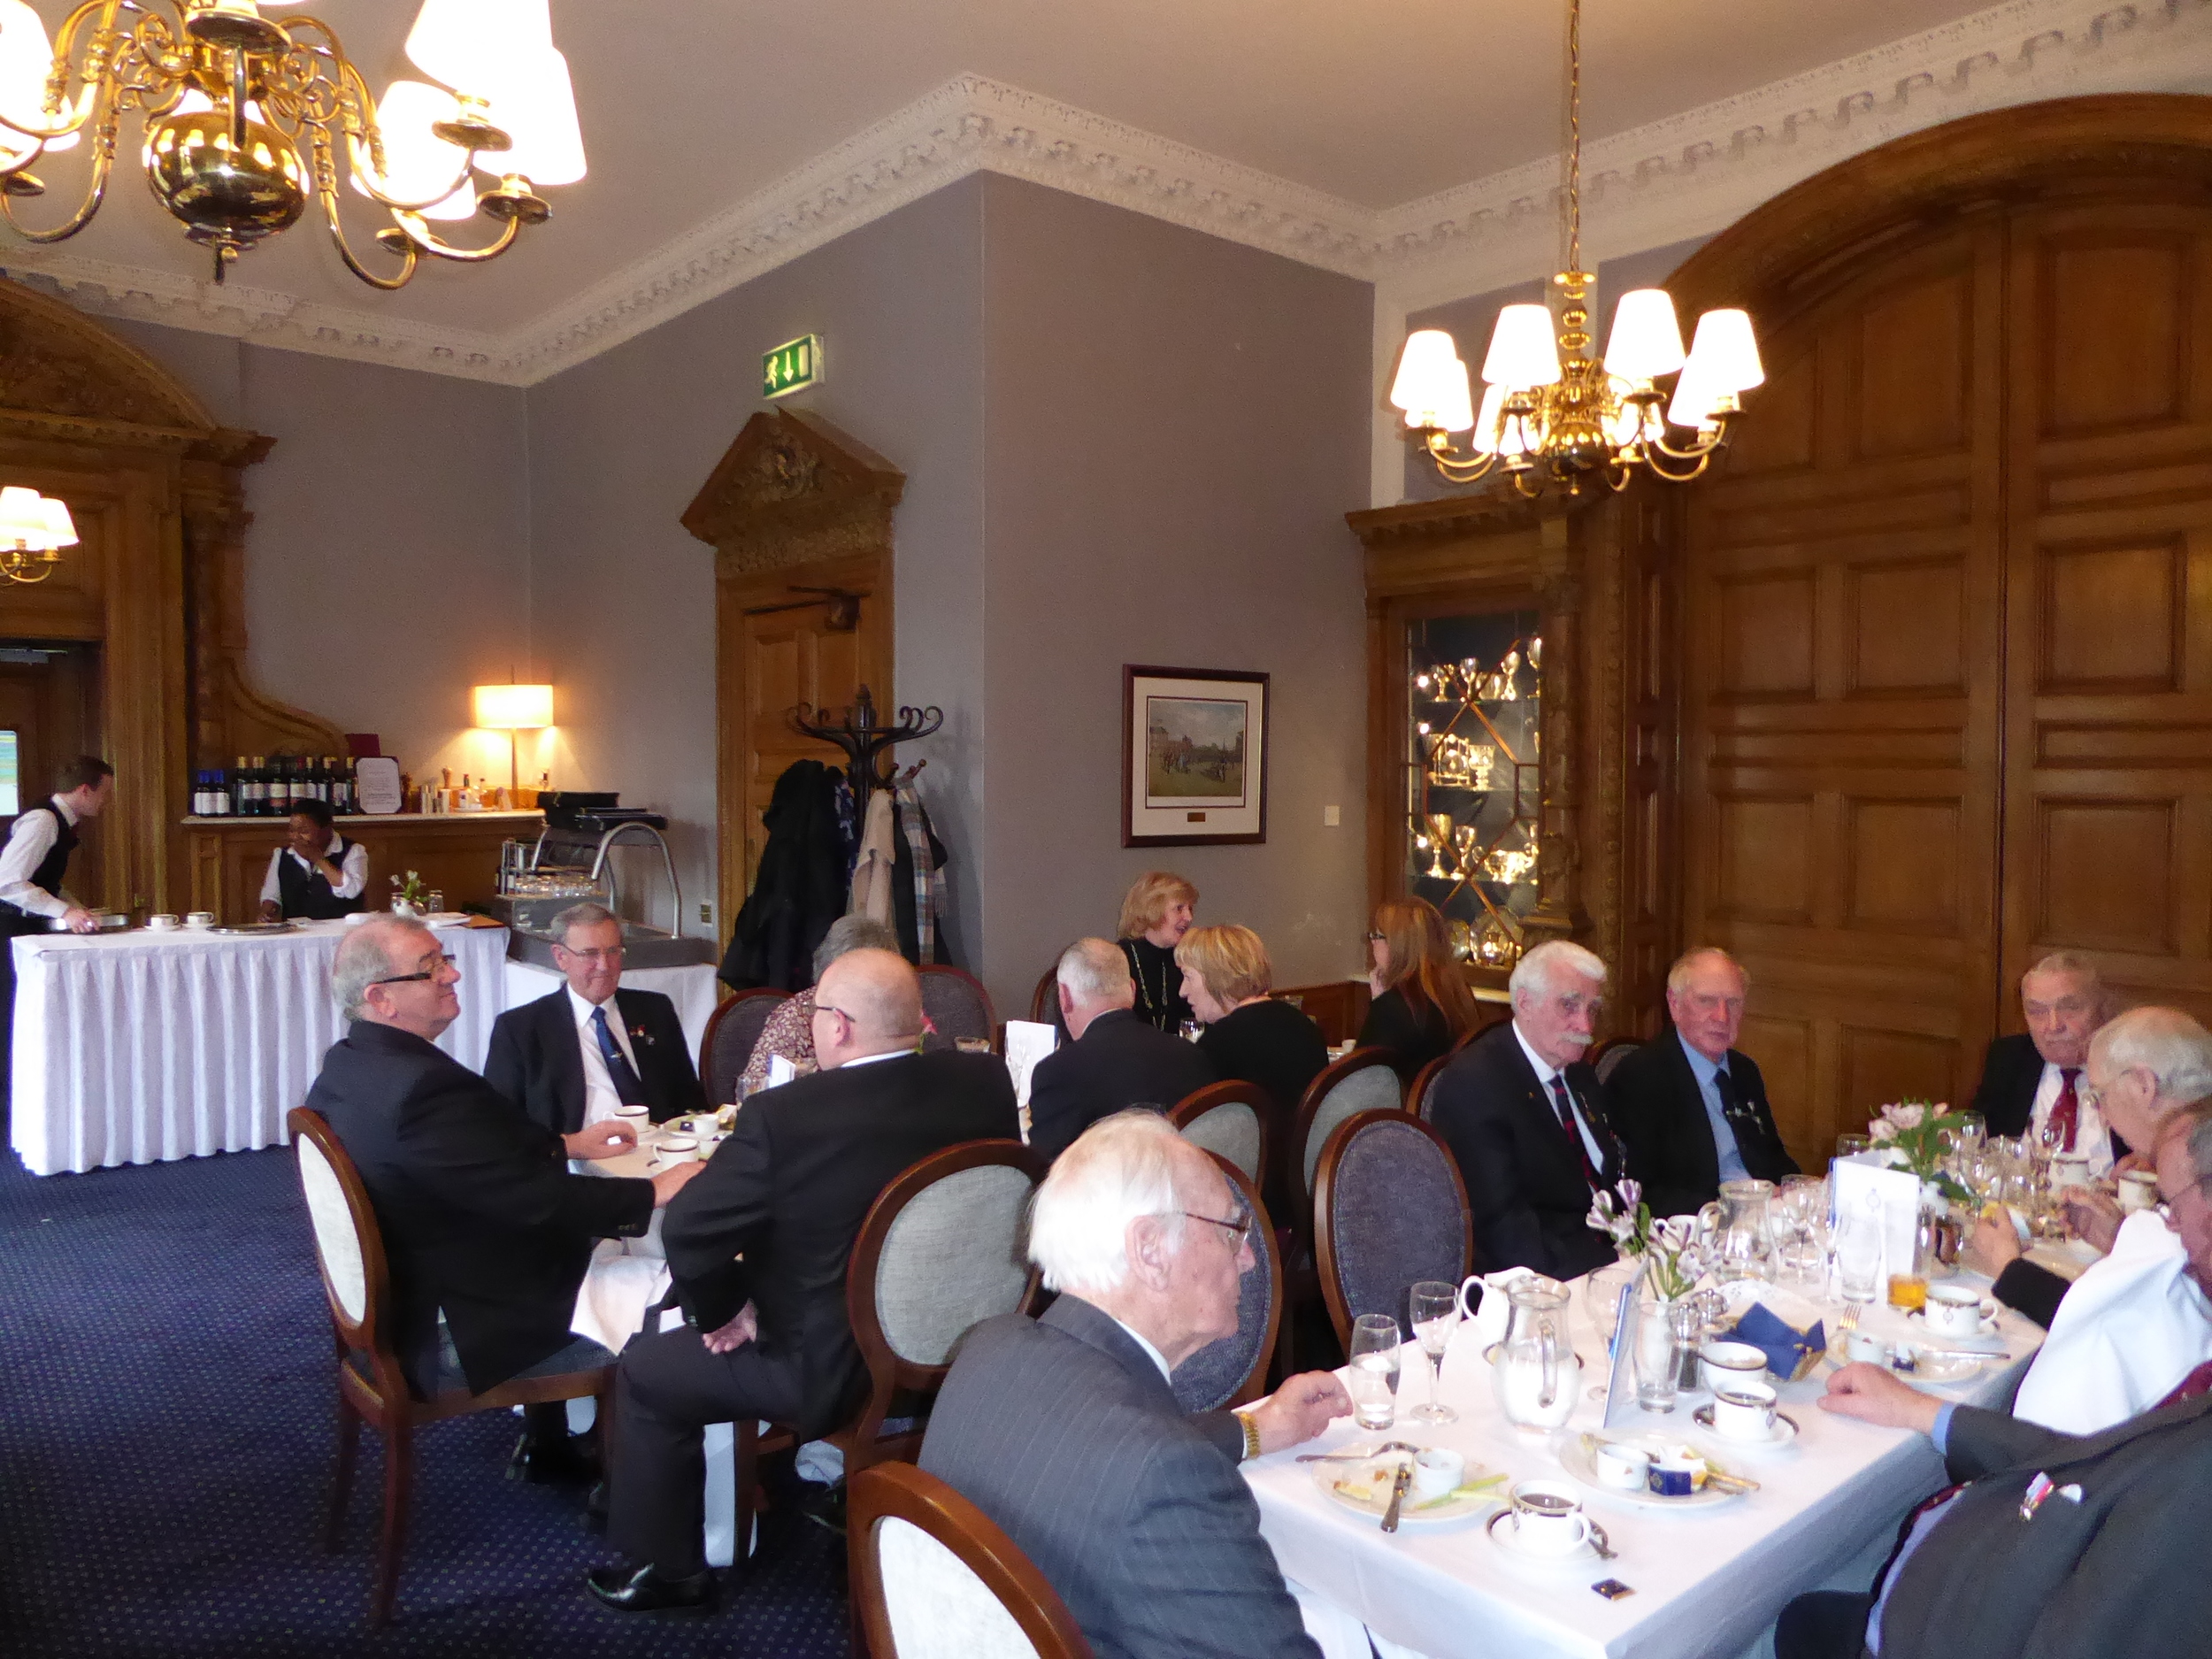 ABA Stirlingshire Visit to the National War Memorial Edinburgh Castle followed by lunch at the Royal Scots Club